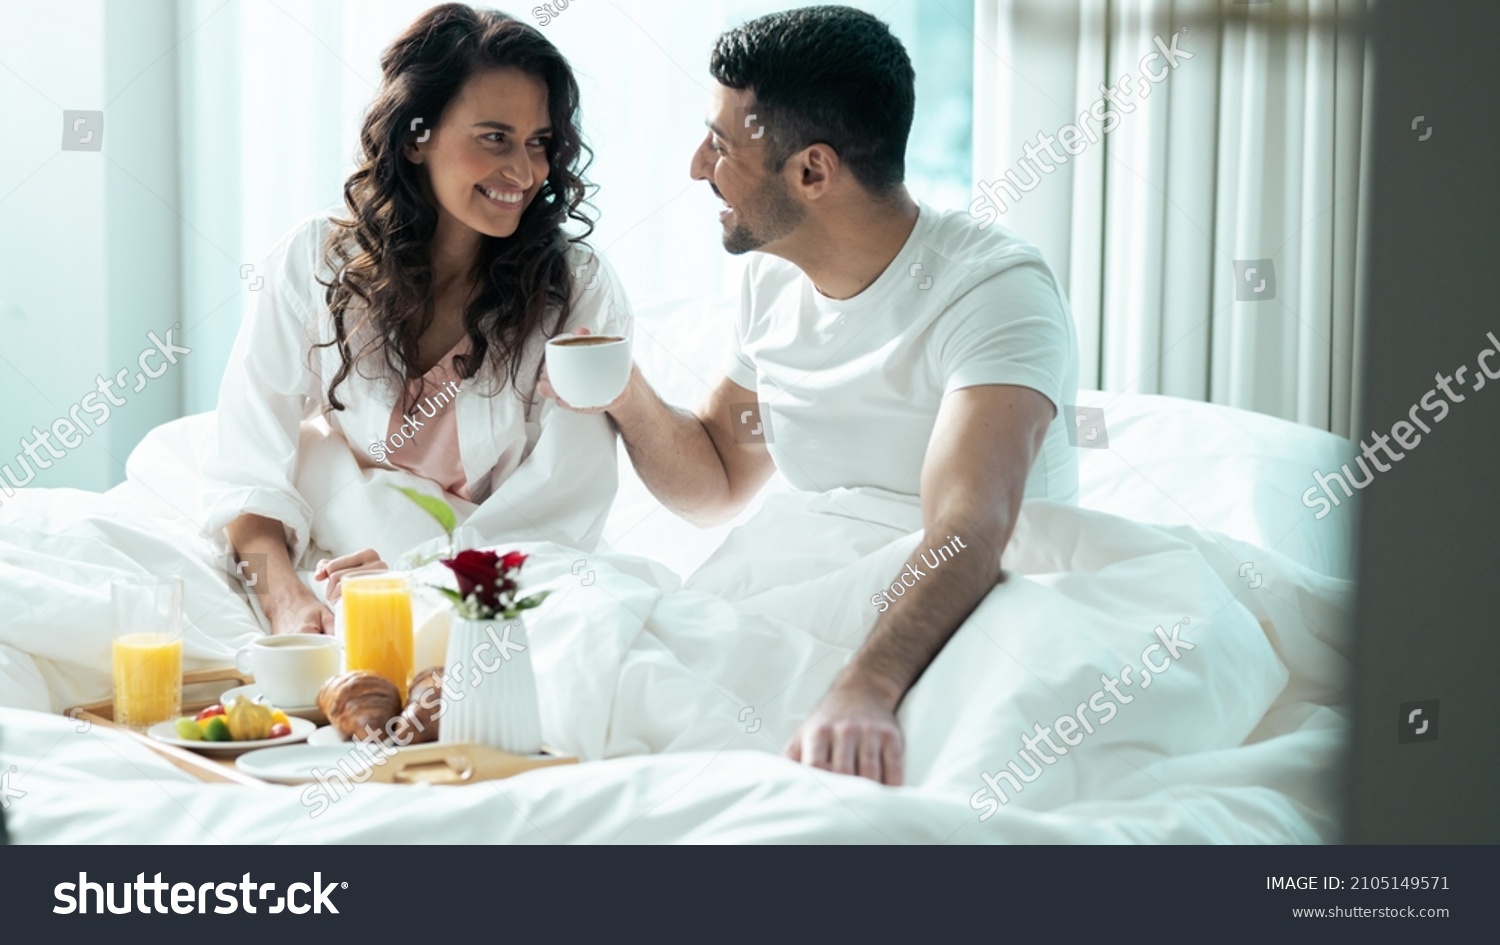 Isolated Beautiful Ethnic Couple Celebrating Valentines Day in a Fancy Hotel Suite, Eating Breakfast Off of a Fancy Tray As They Stay Under The Blanket, Looking Into Each Others Eyes and Smiling. #2105149571